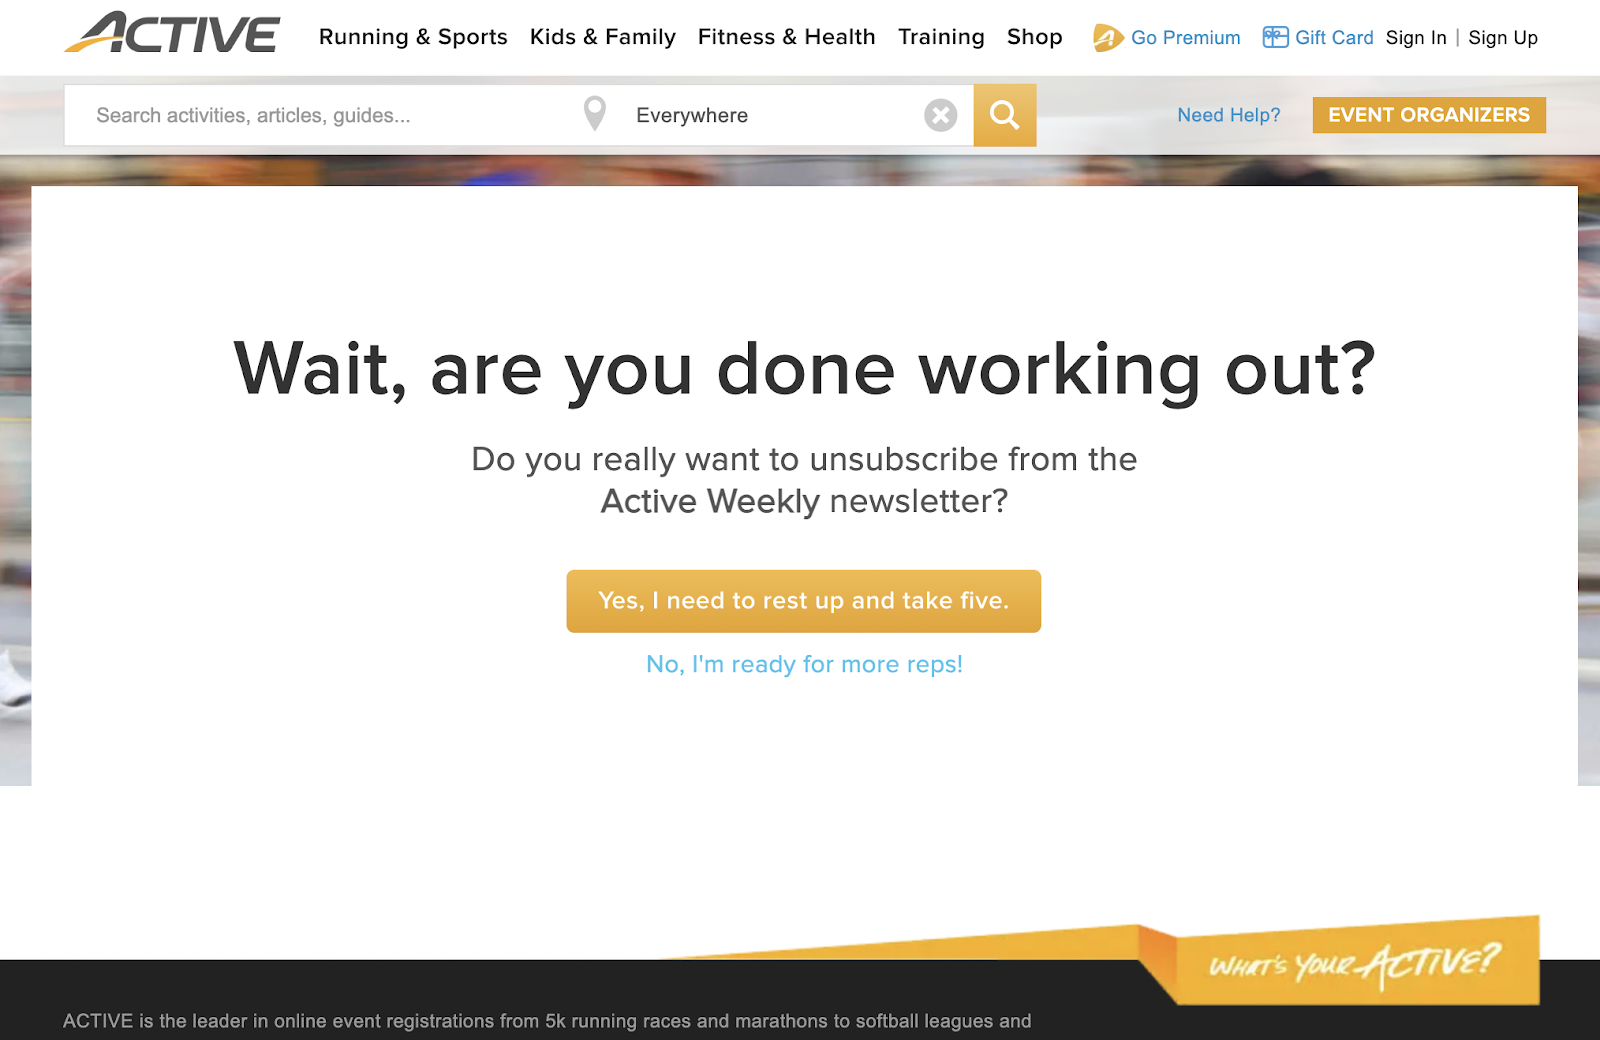 An example of confirm shaming, where it asks if you're done working out